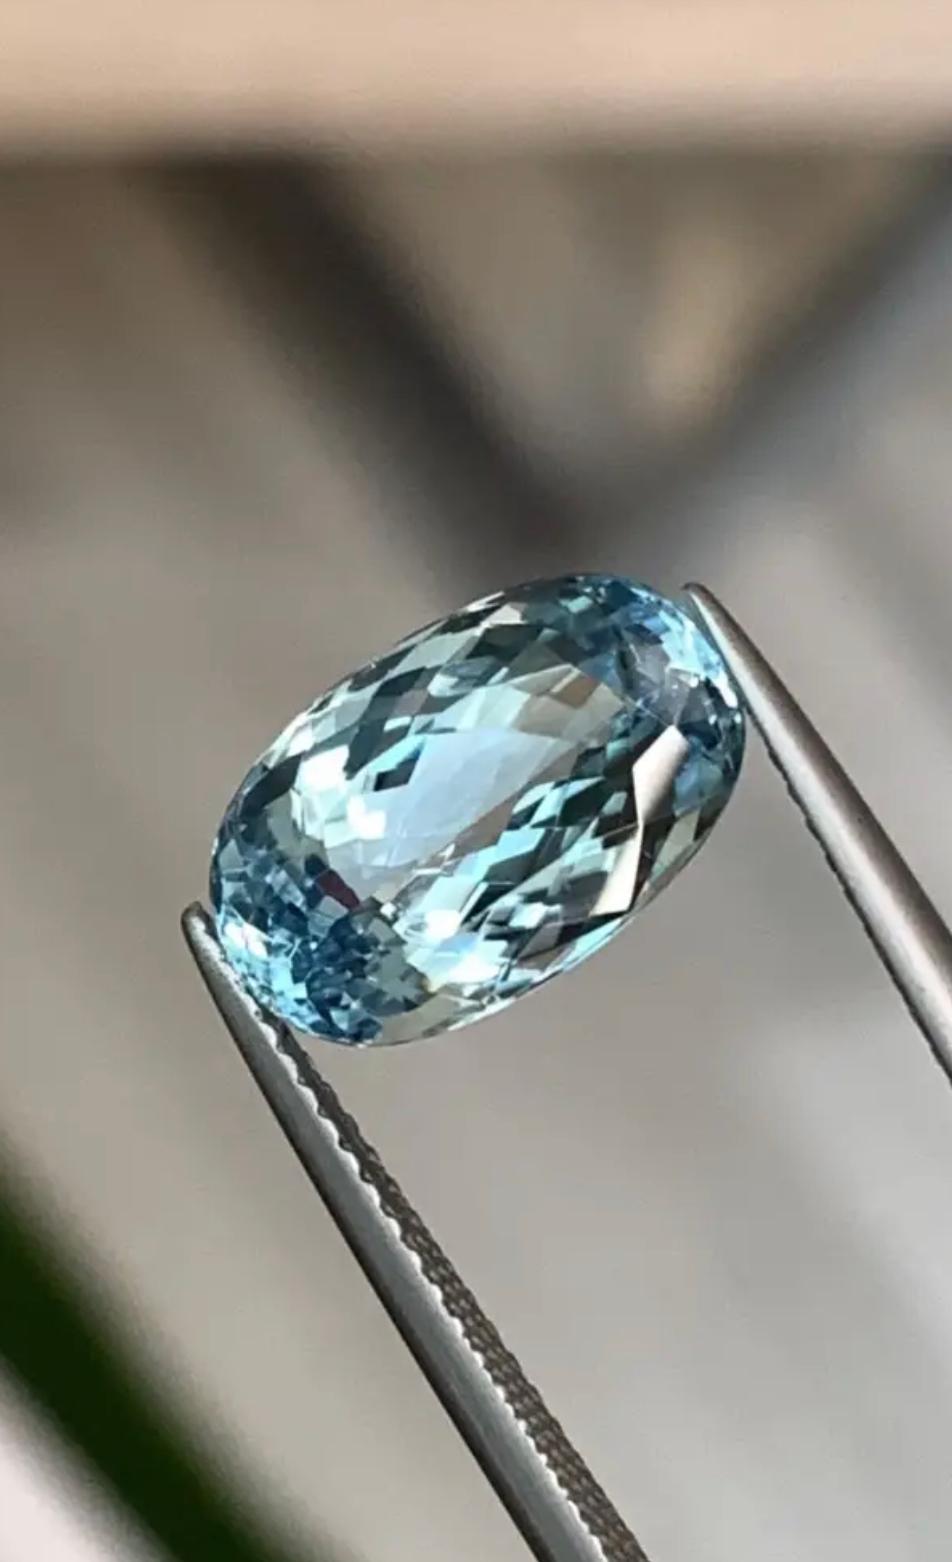 This exquisite 5.29ct Blue Paraiba Tourmaline is a true marvel of nature. Mined in Mozambique, this gem is a rare and captivating shade of blue. The stunning oval cut highlights the gem's exceptional colour and maximizes its brilliance and fire,